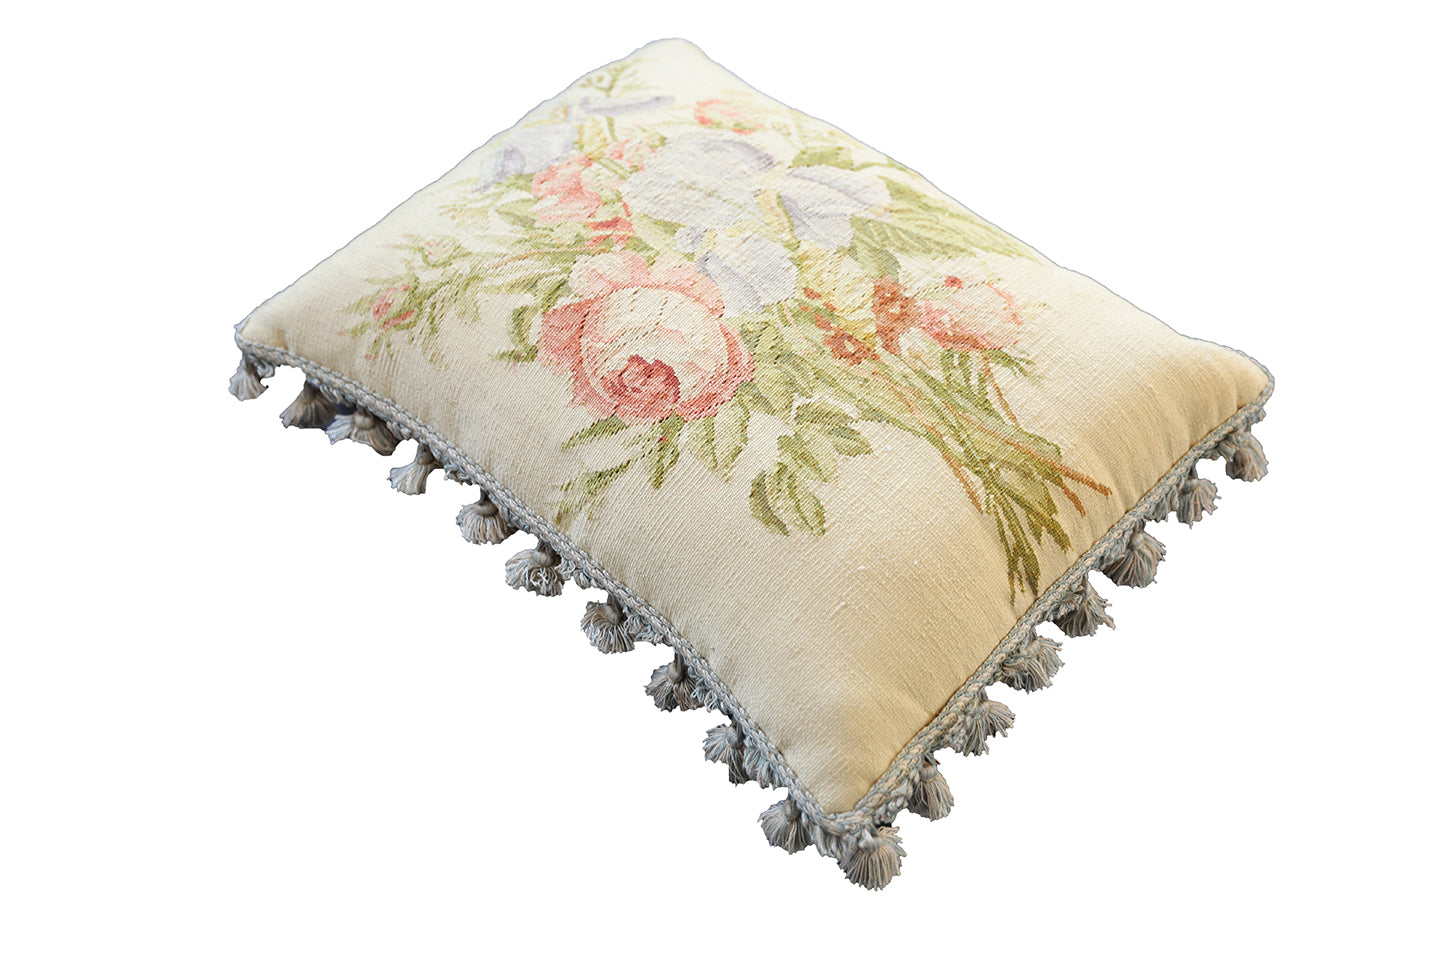 18"x22" Cream and Pink Floral Aubusson Decor Pillow Case